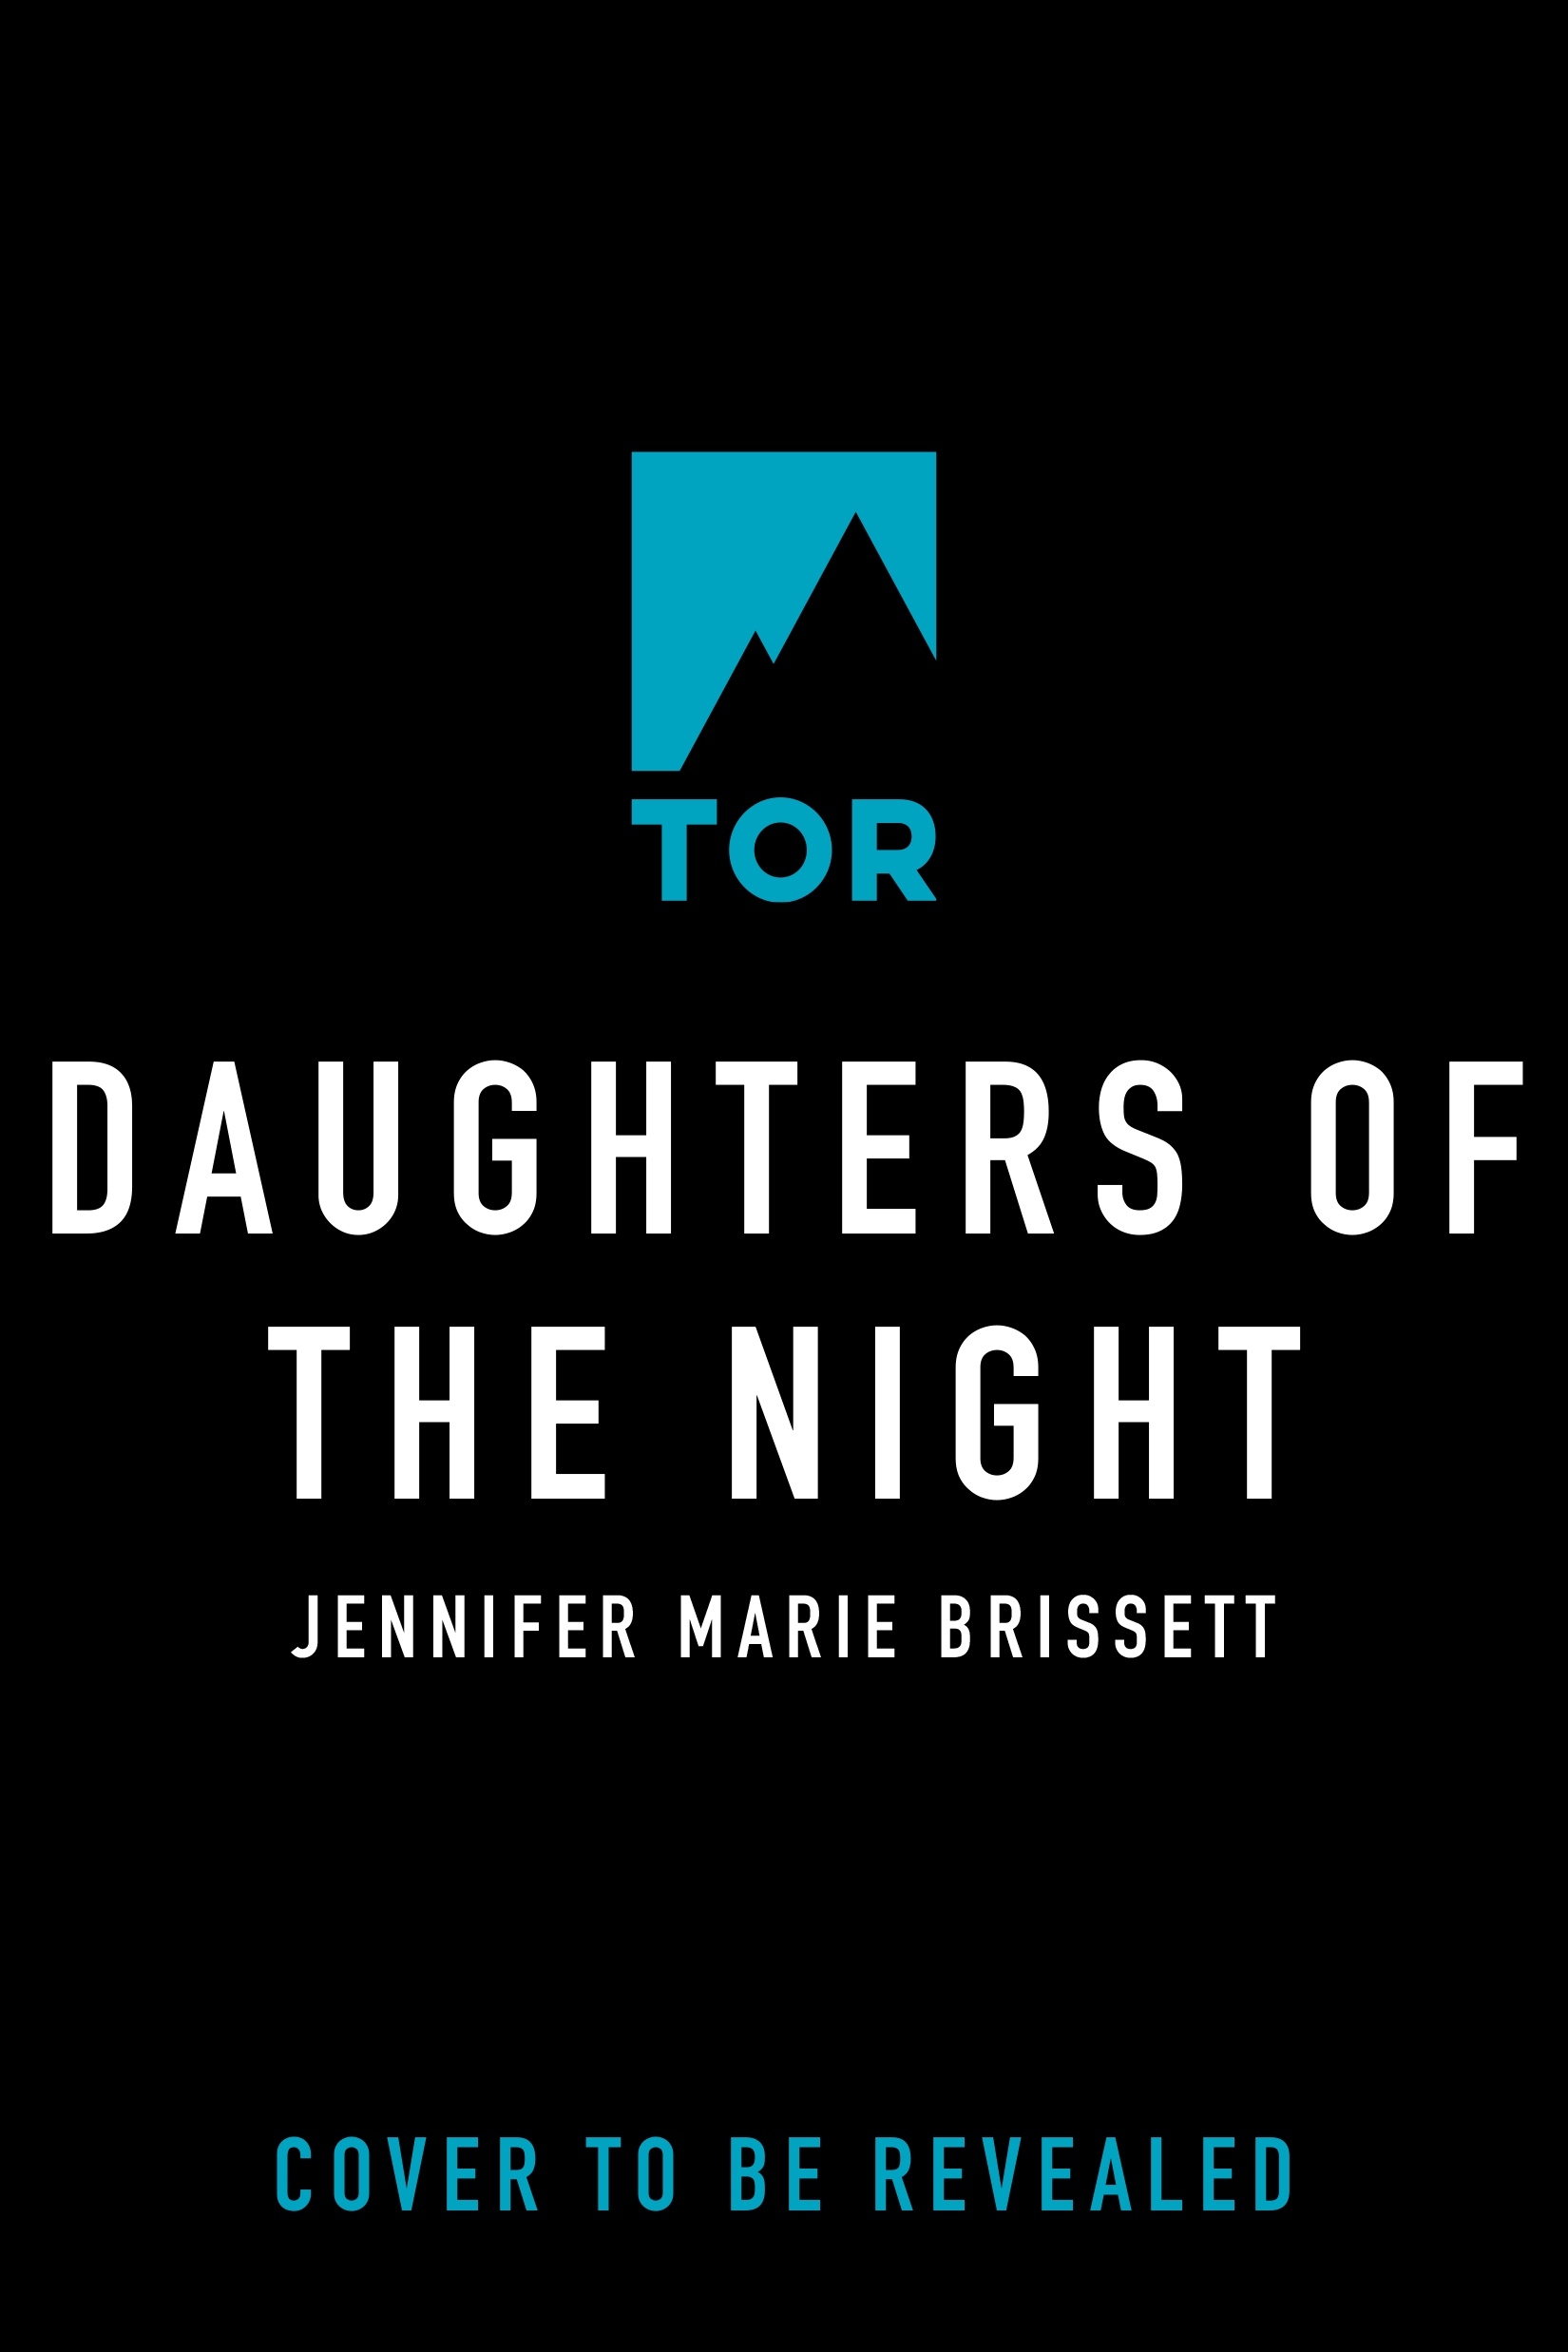 Daughters of the Night by Jennifer Marie Brissett